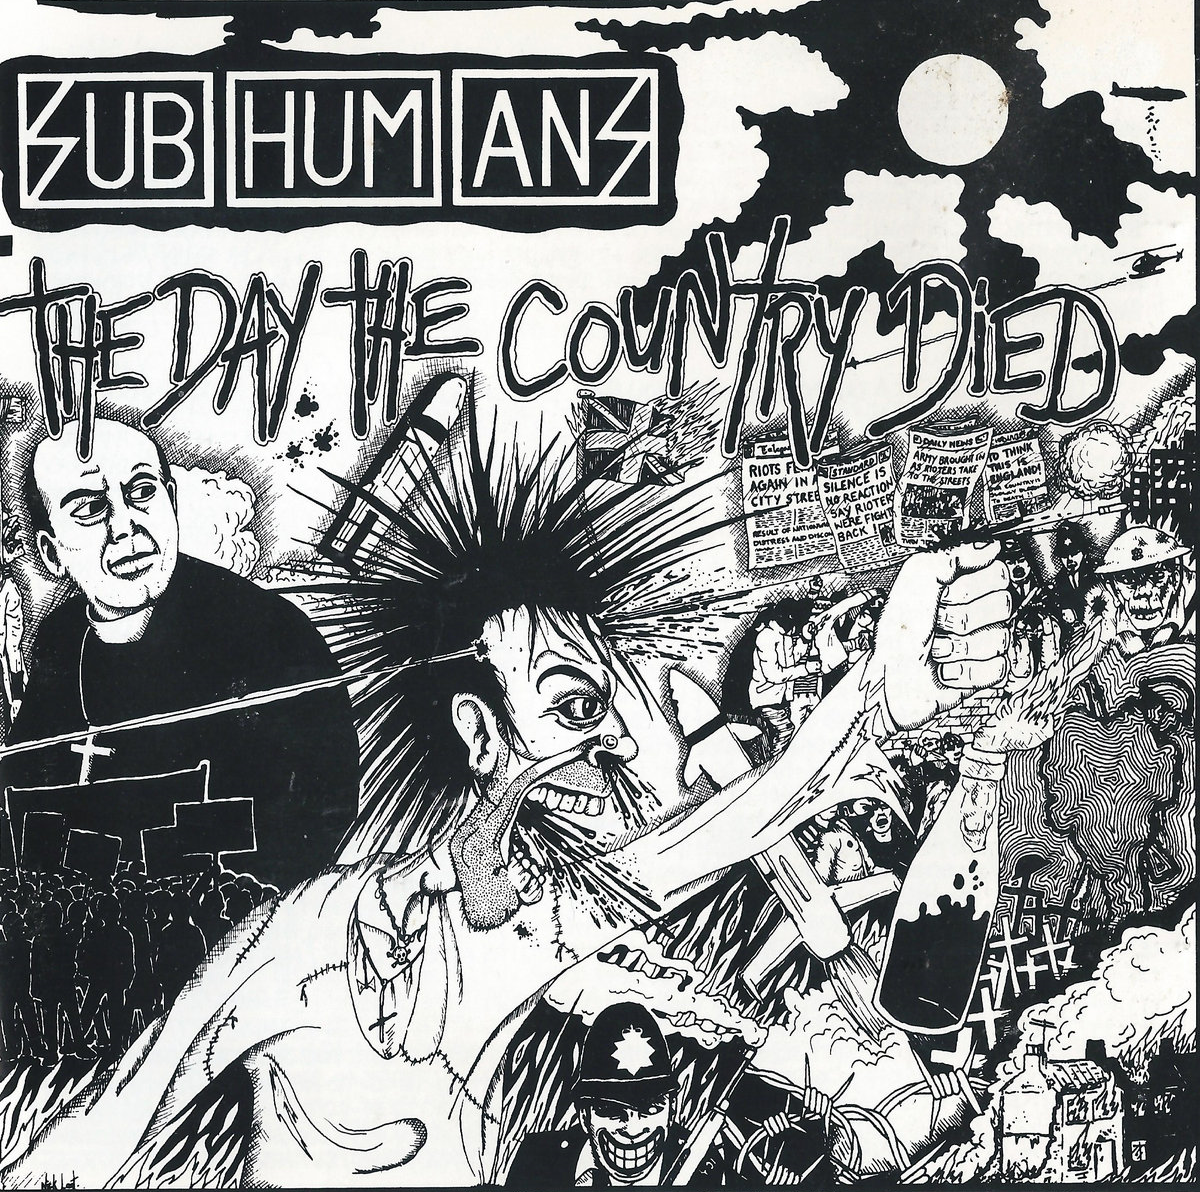 Subhumans-The Day The Country Died-16BIT-WEB-FLAC-1983-VEXED